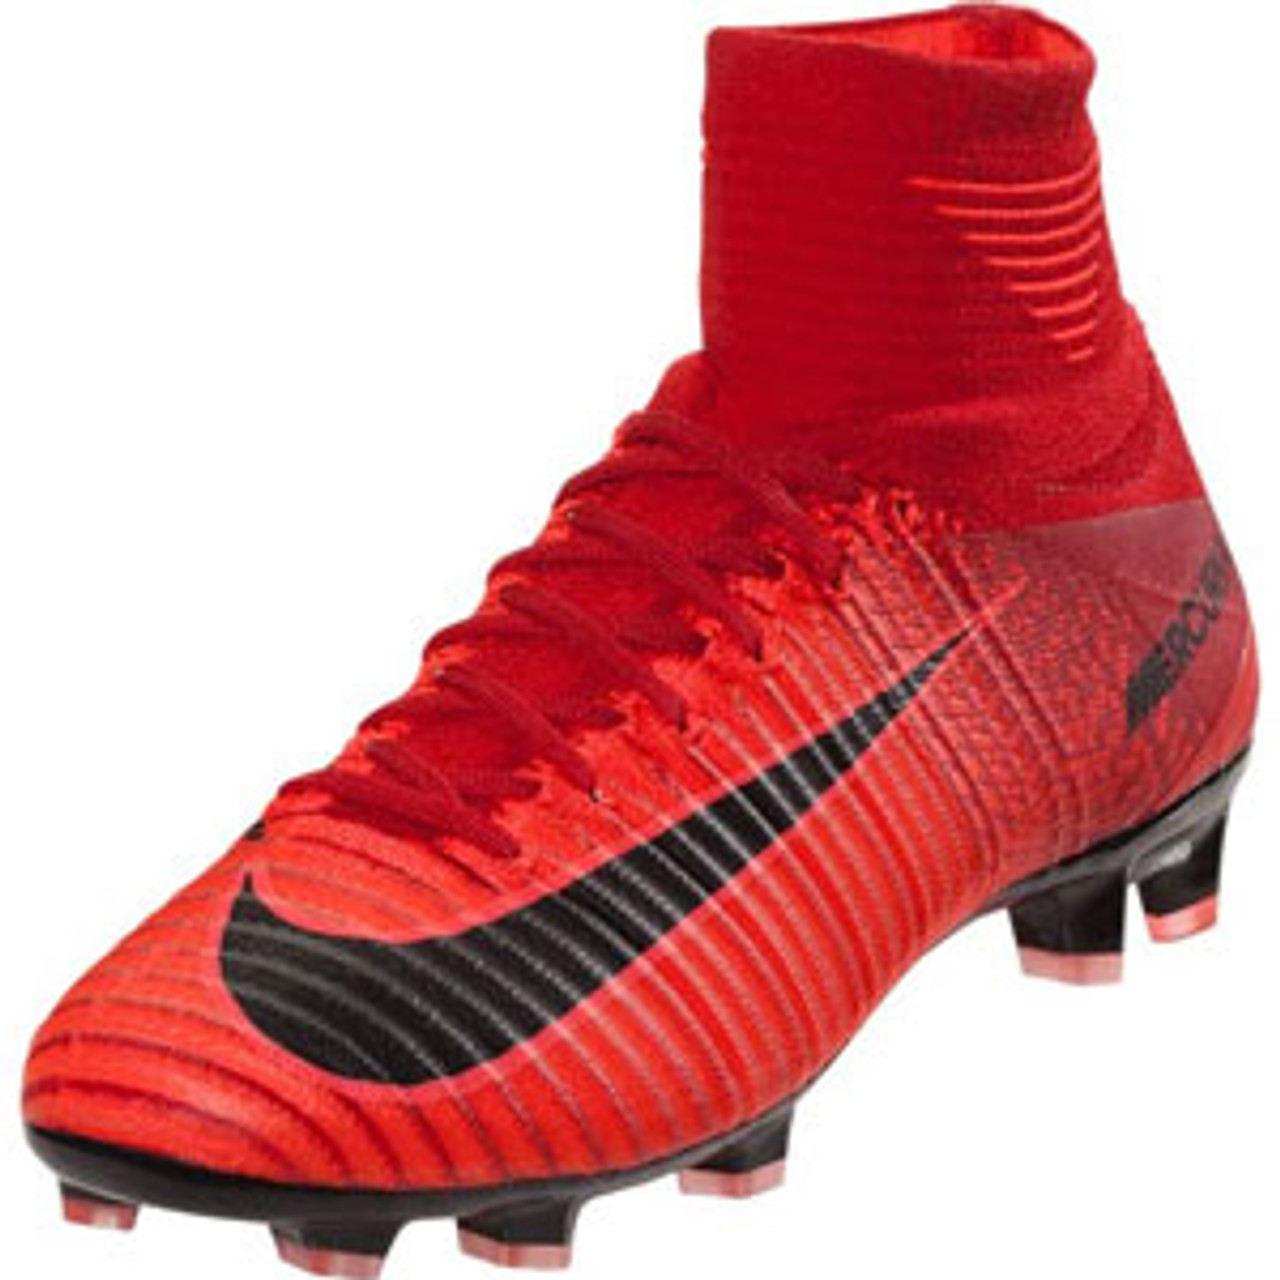 Nike Mercurial Vapor XII Pro FG Mens Boots Firm Ground